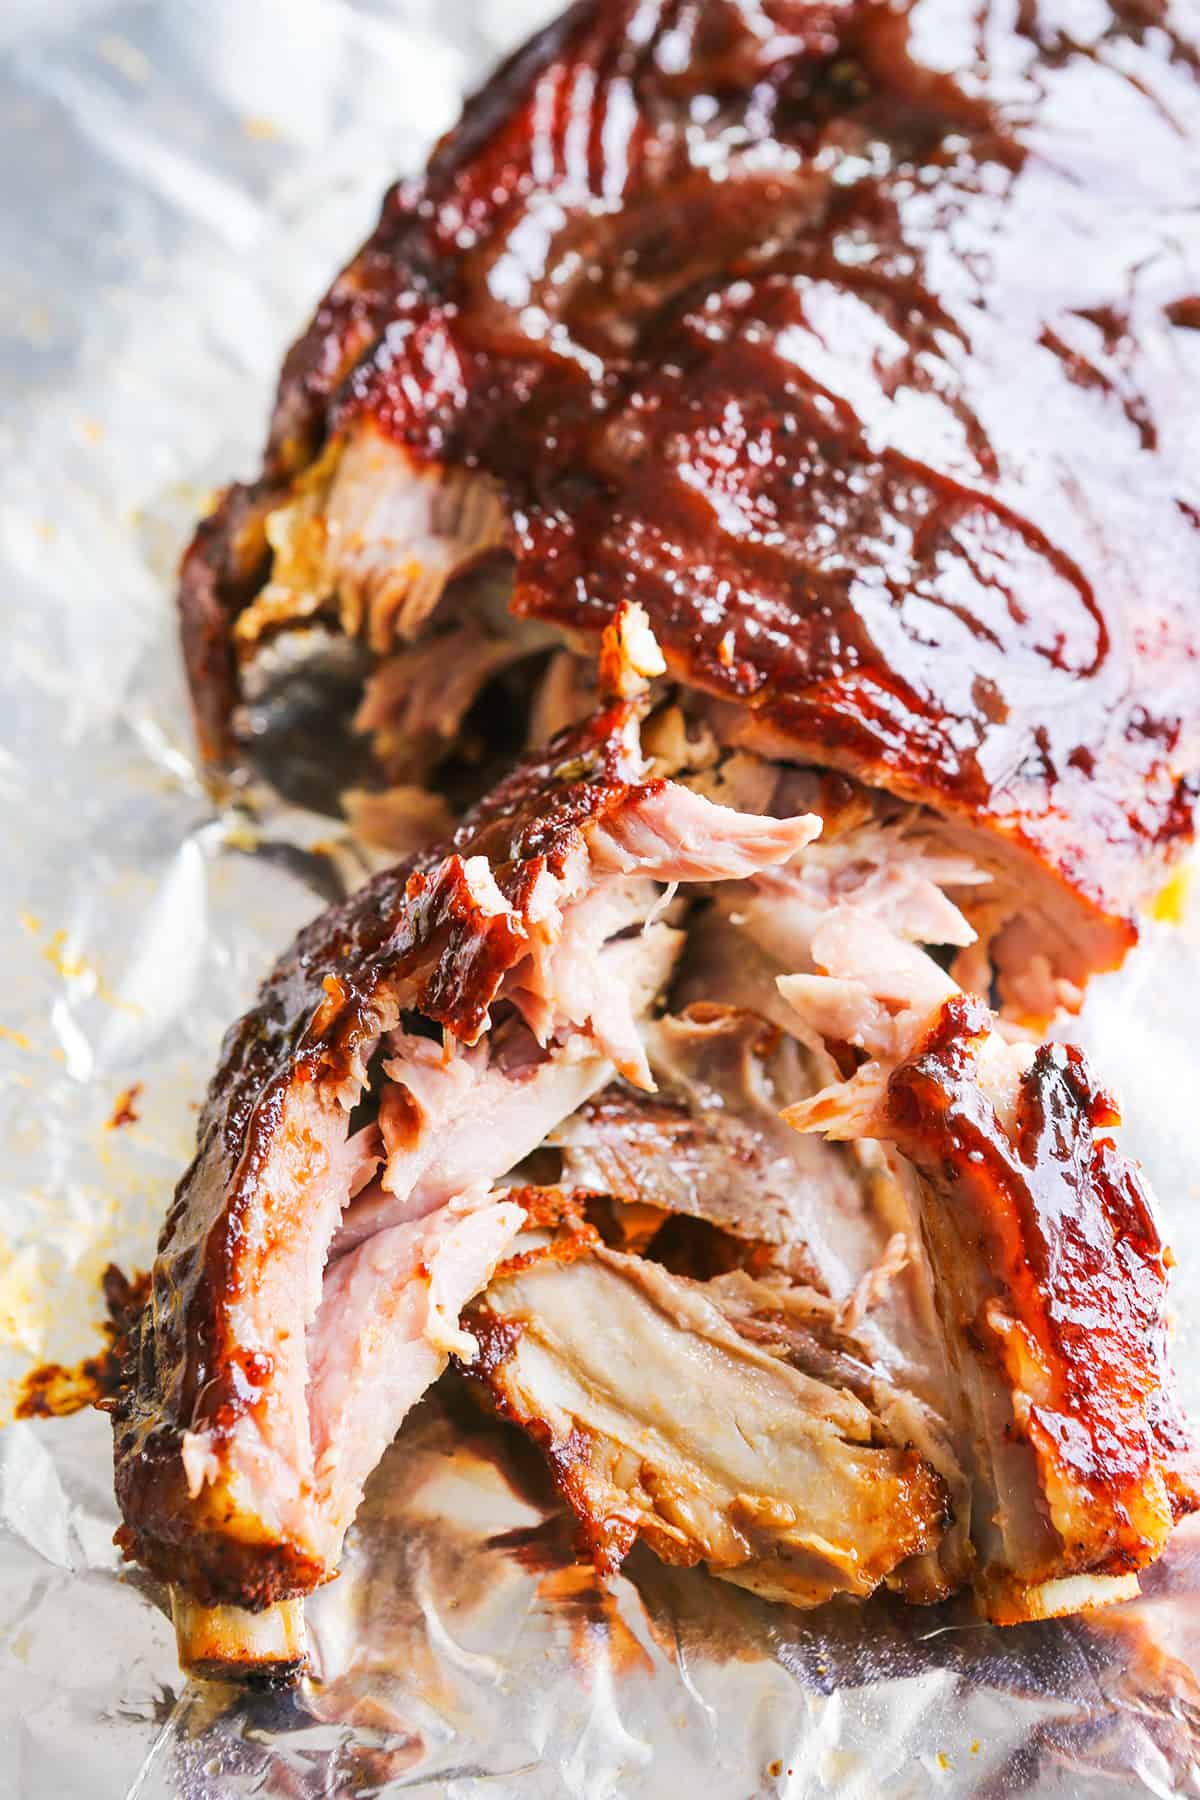 BBQ ribs slathered with sauce, exposing tender rib meat.